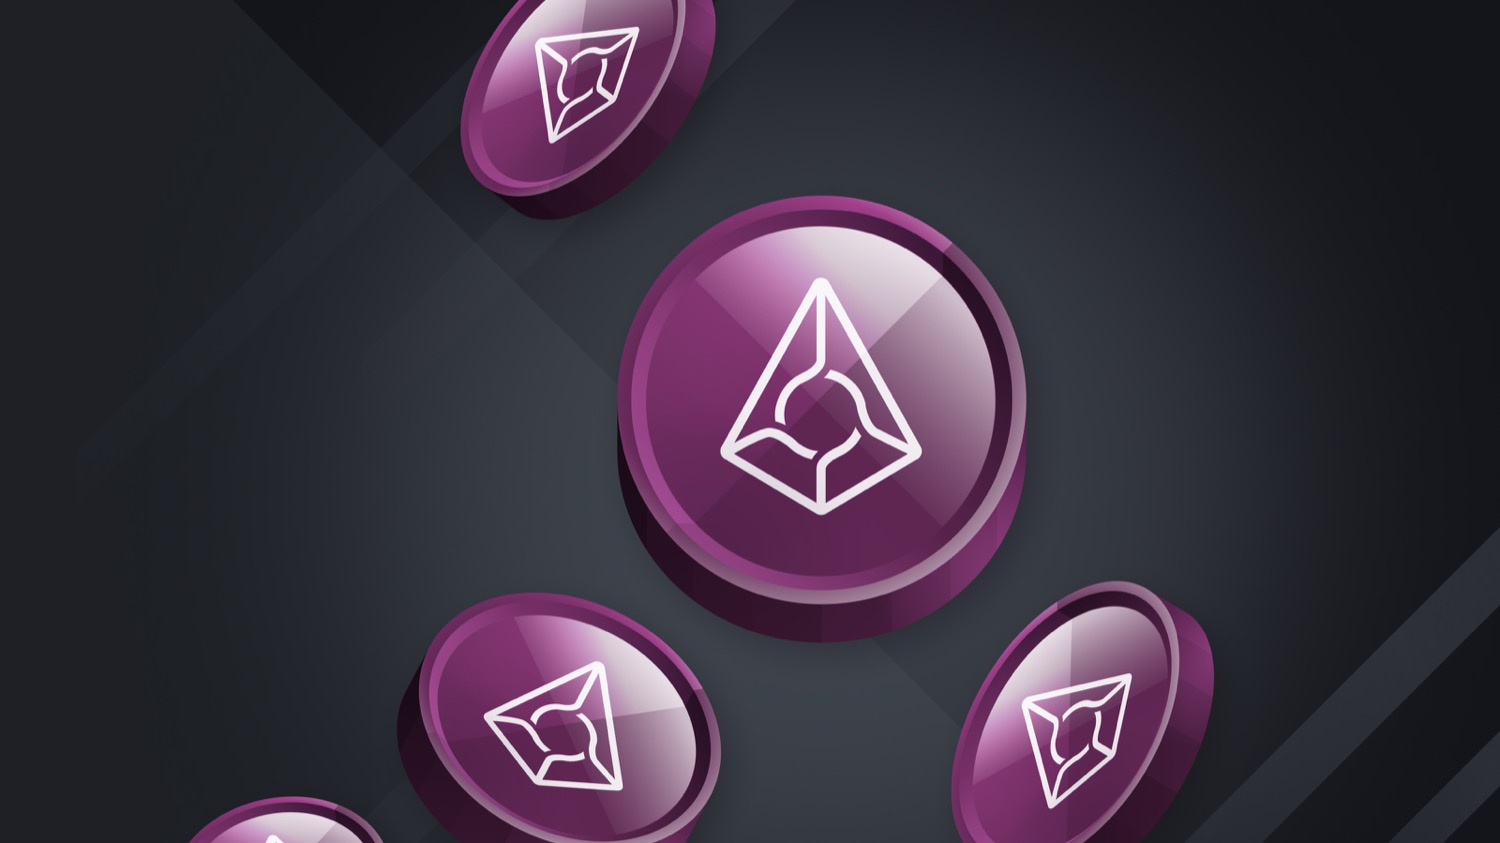 All About Augur (REP)